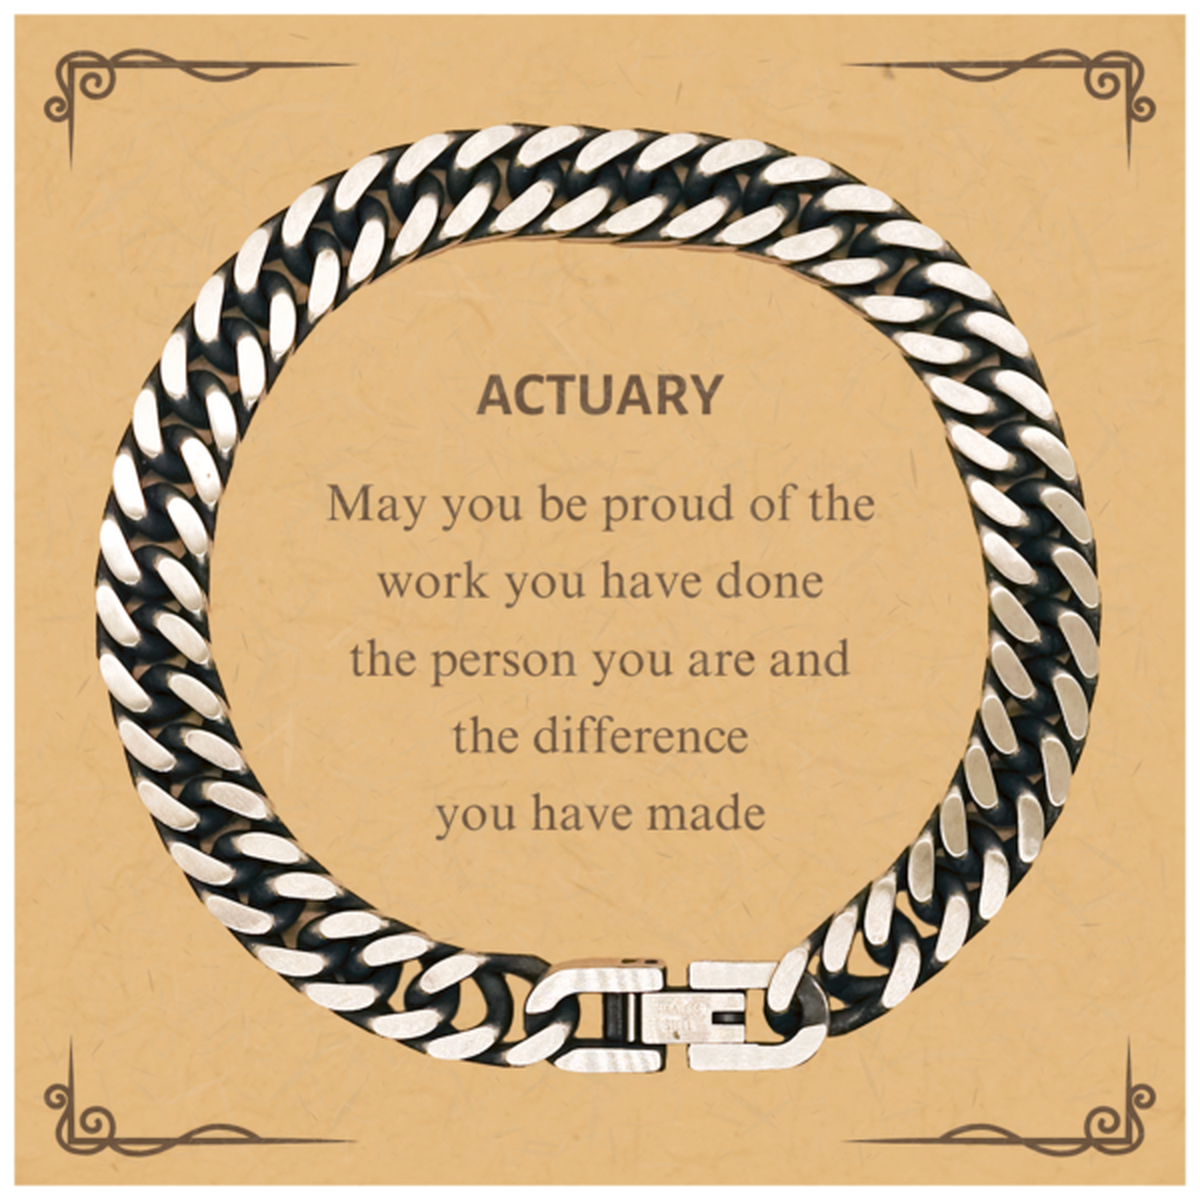 Actuary May you be proud of the work you have done, Retirement Actuary Cuban Link Chain Bracelet for Colleague Appreciation Gifts Amazing for Actuary